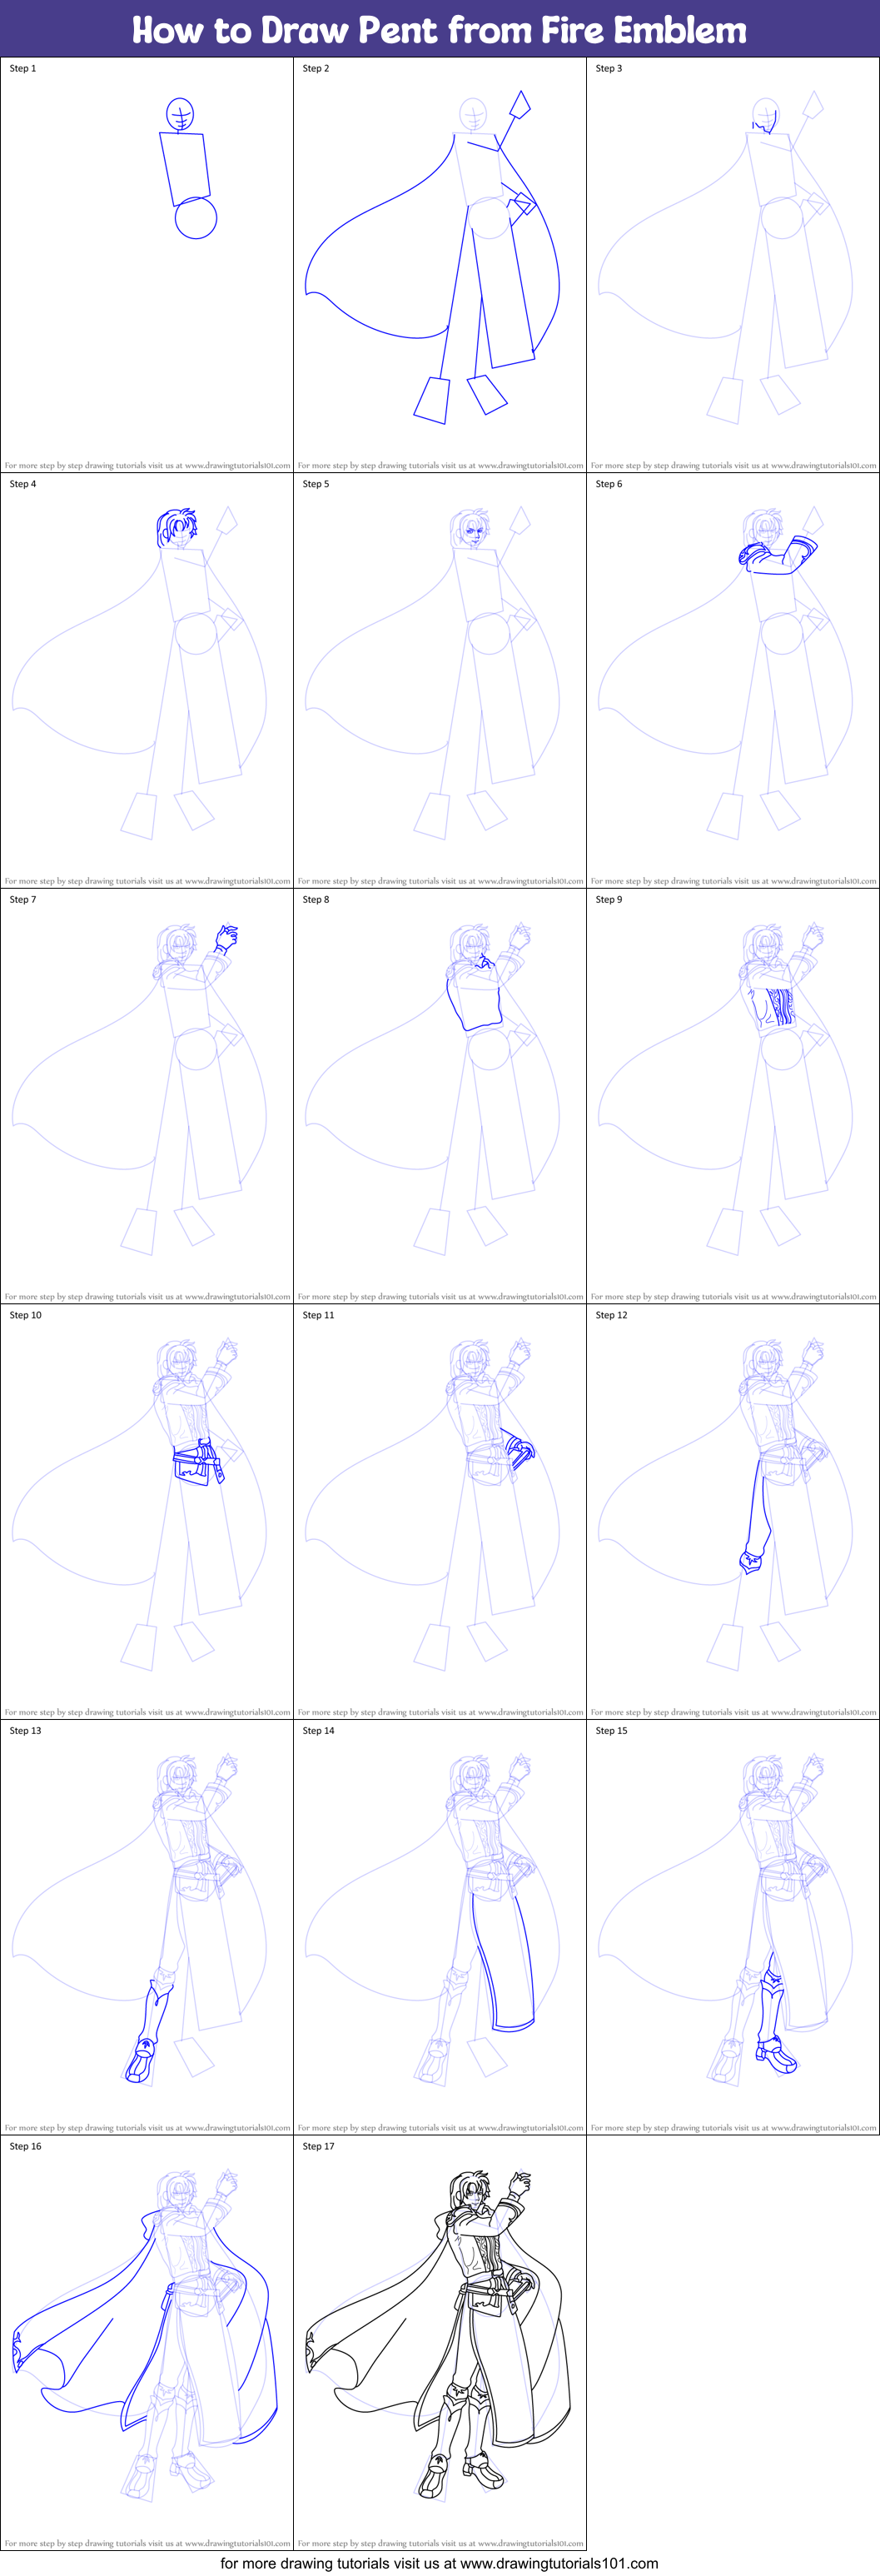 How to Draw Pent from Fire Emblem printable step by step drawing sheet ...